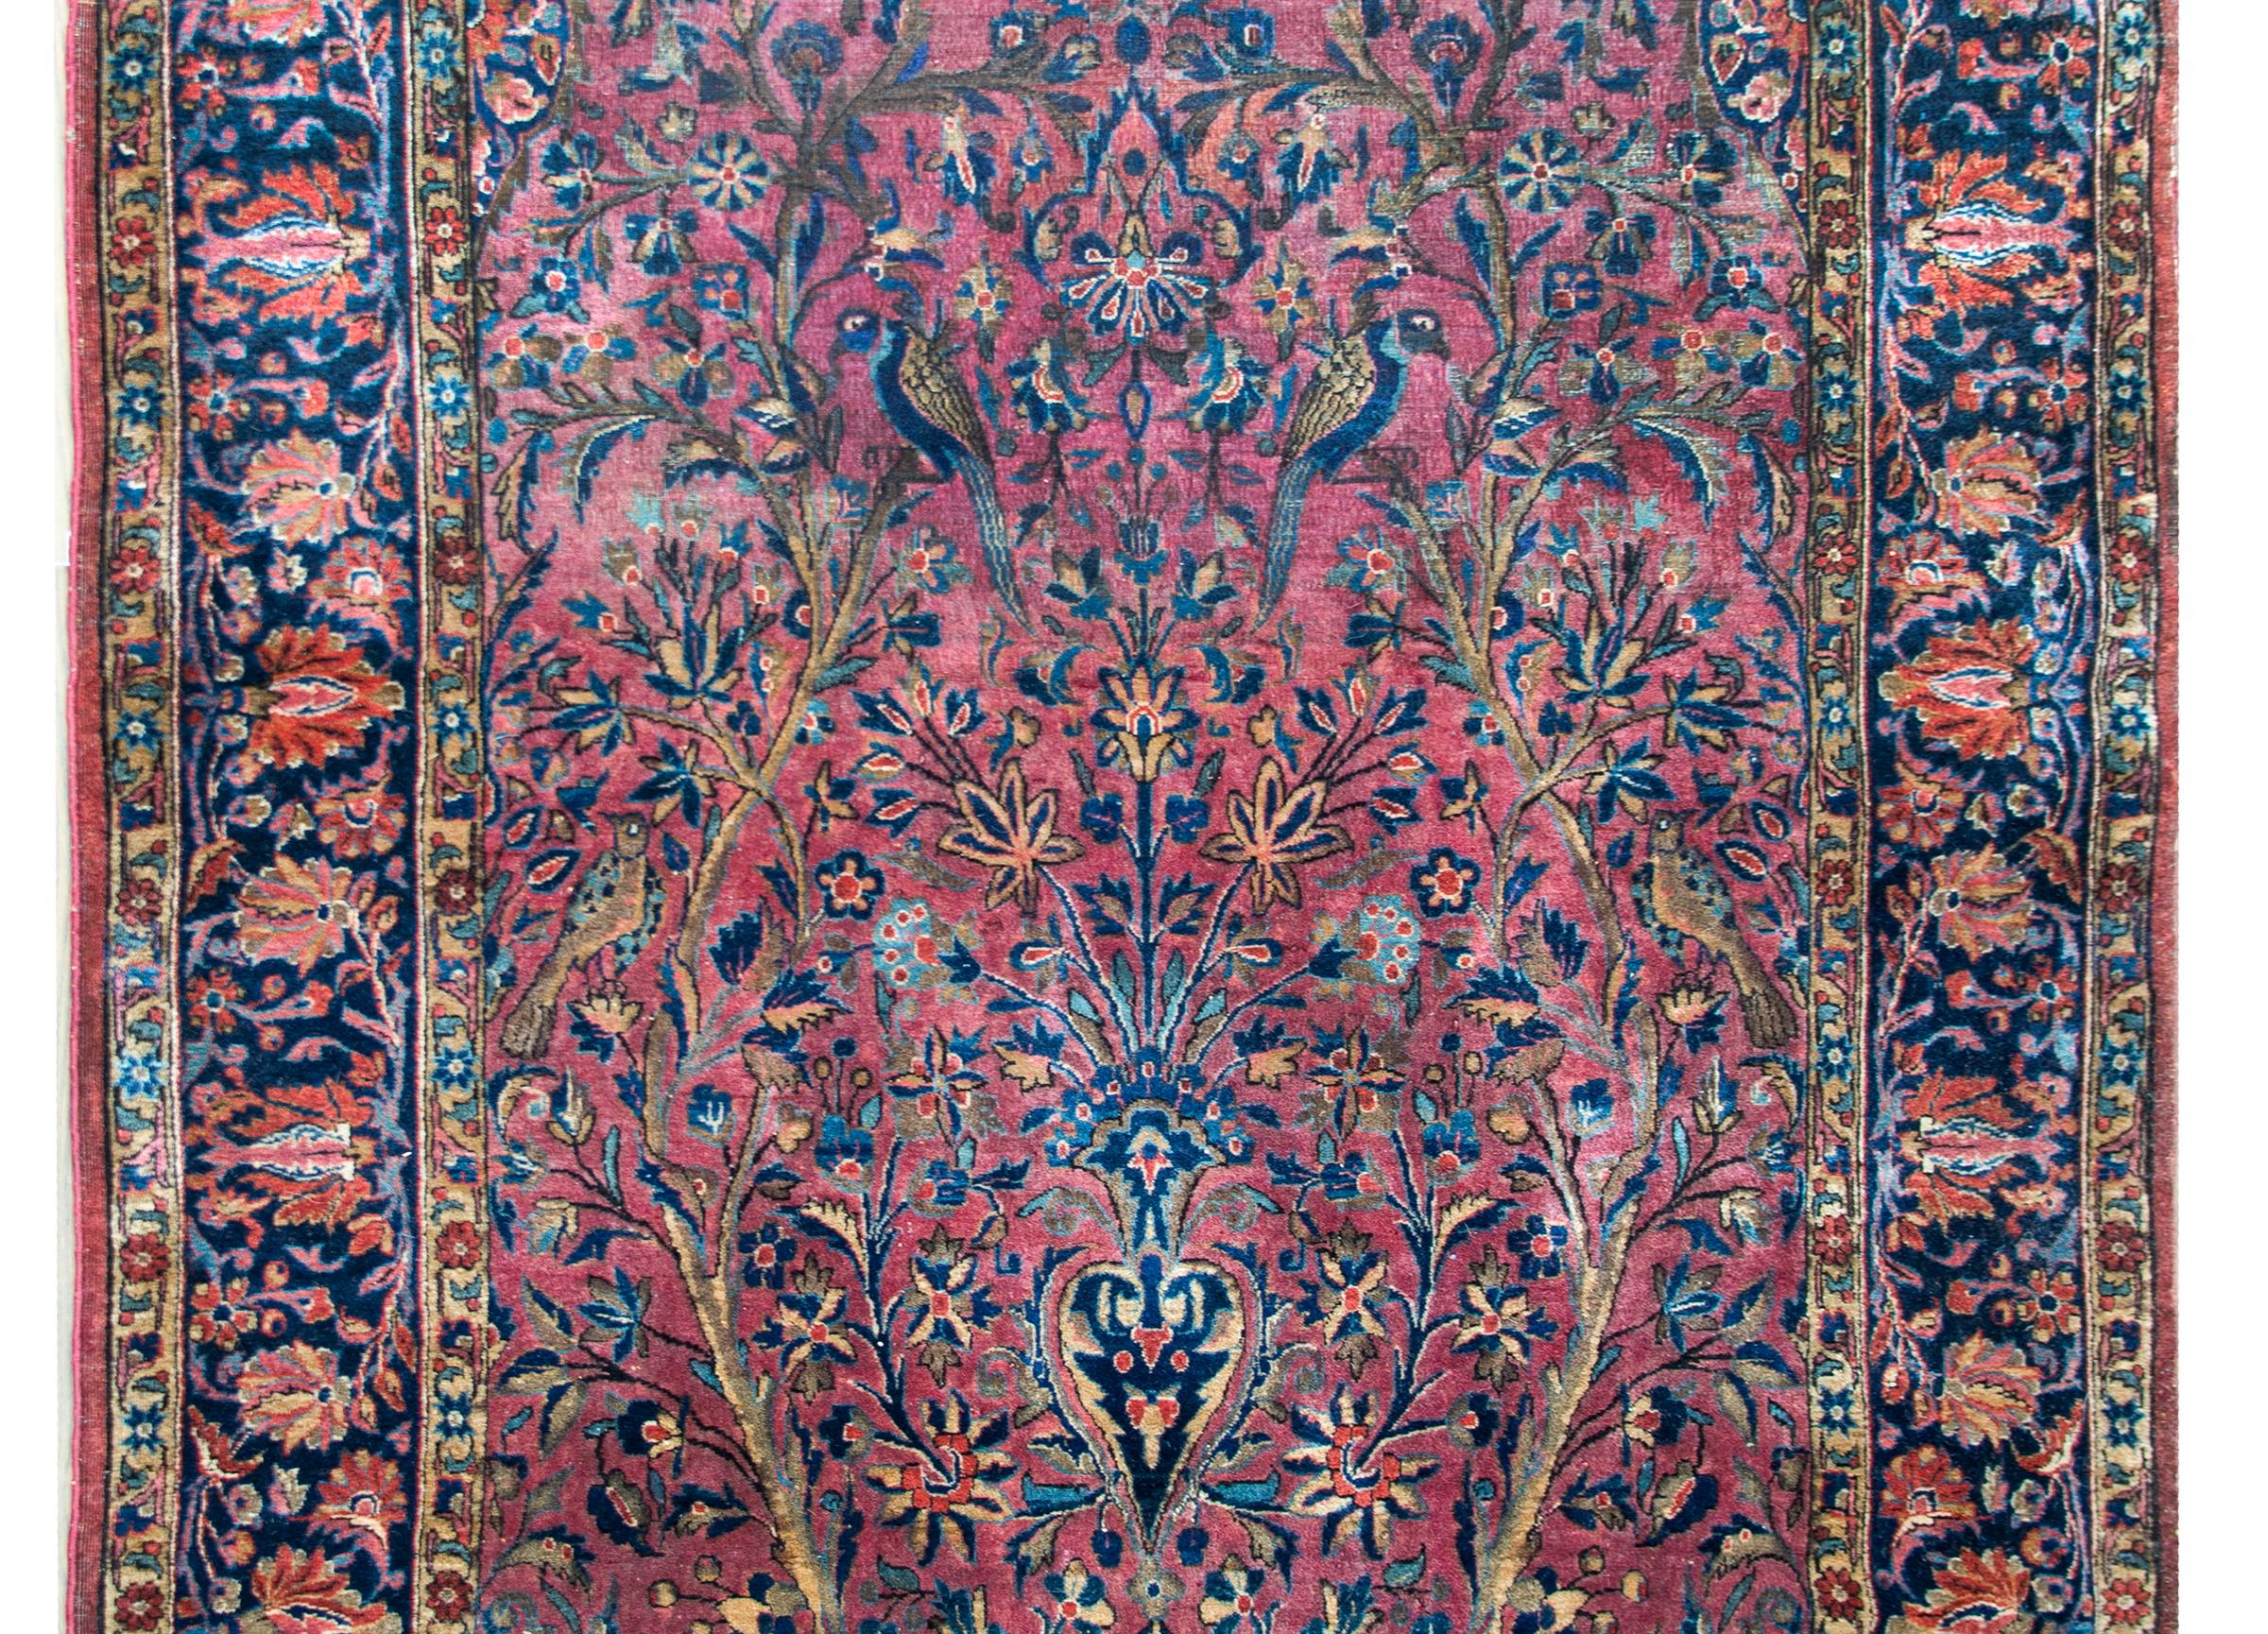 A stunning late 19th century Persian Kashan rug with an expertly woven double tree-of-life pattern containing two trees, mirror images of each other, full of flowering branches and myriad birds, both flanking a central vase potted with even more